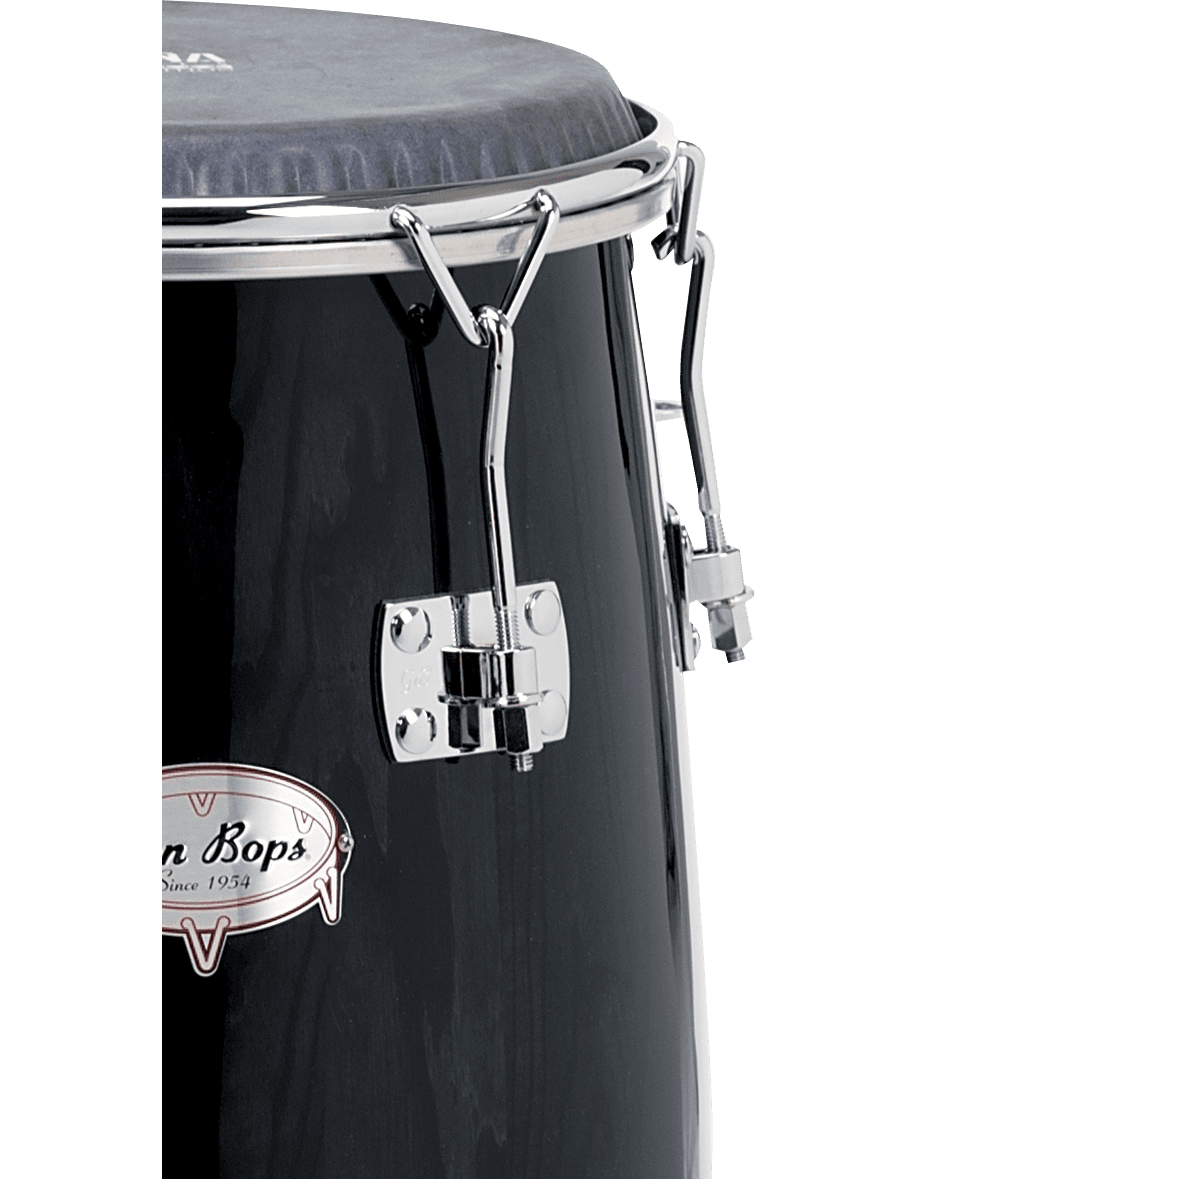 gonBops ACUNA SERIES SPECIAL EDITION カホン-